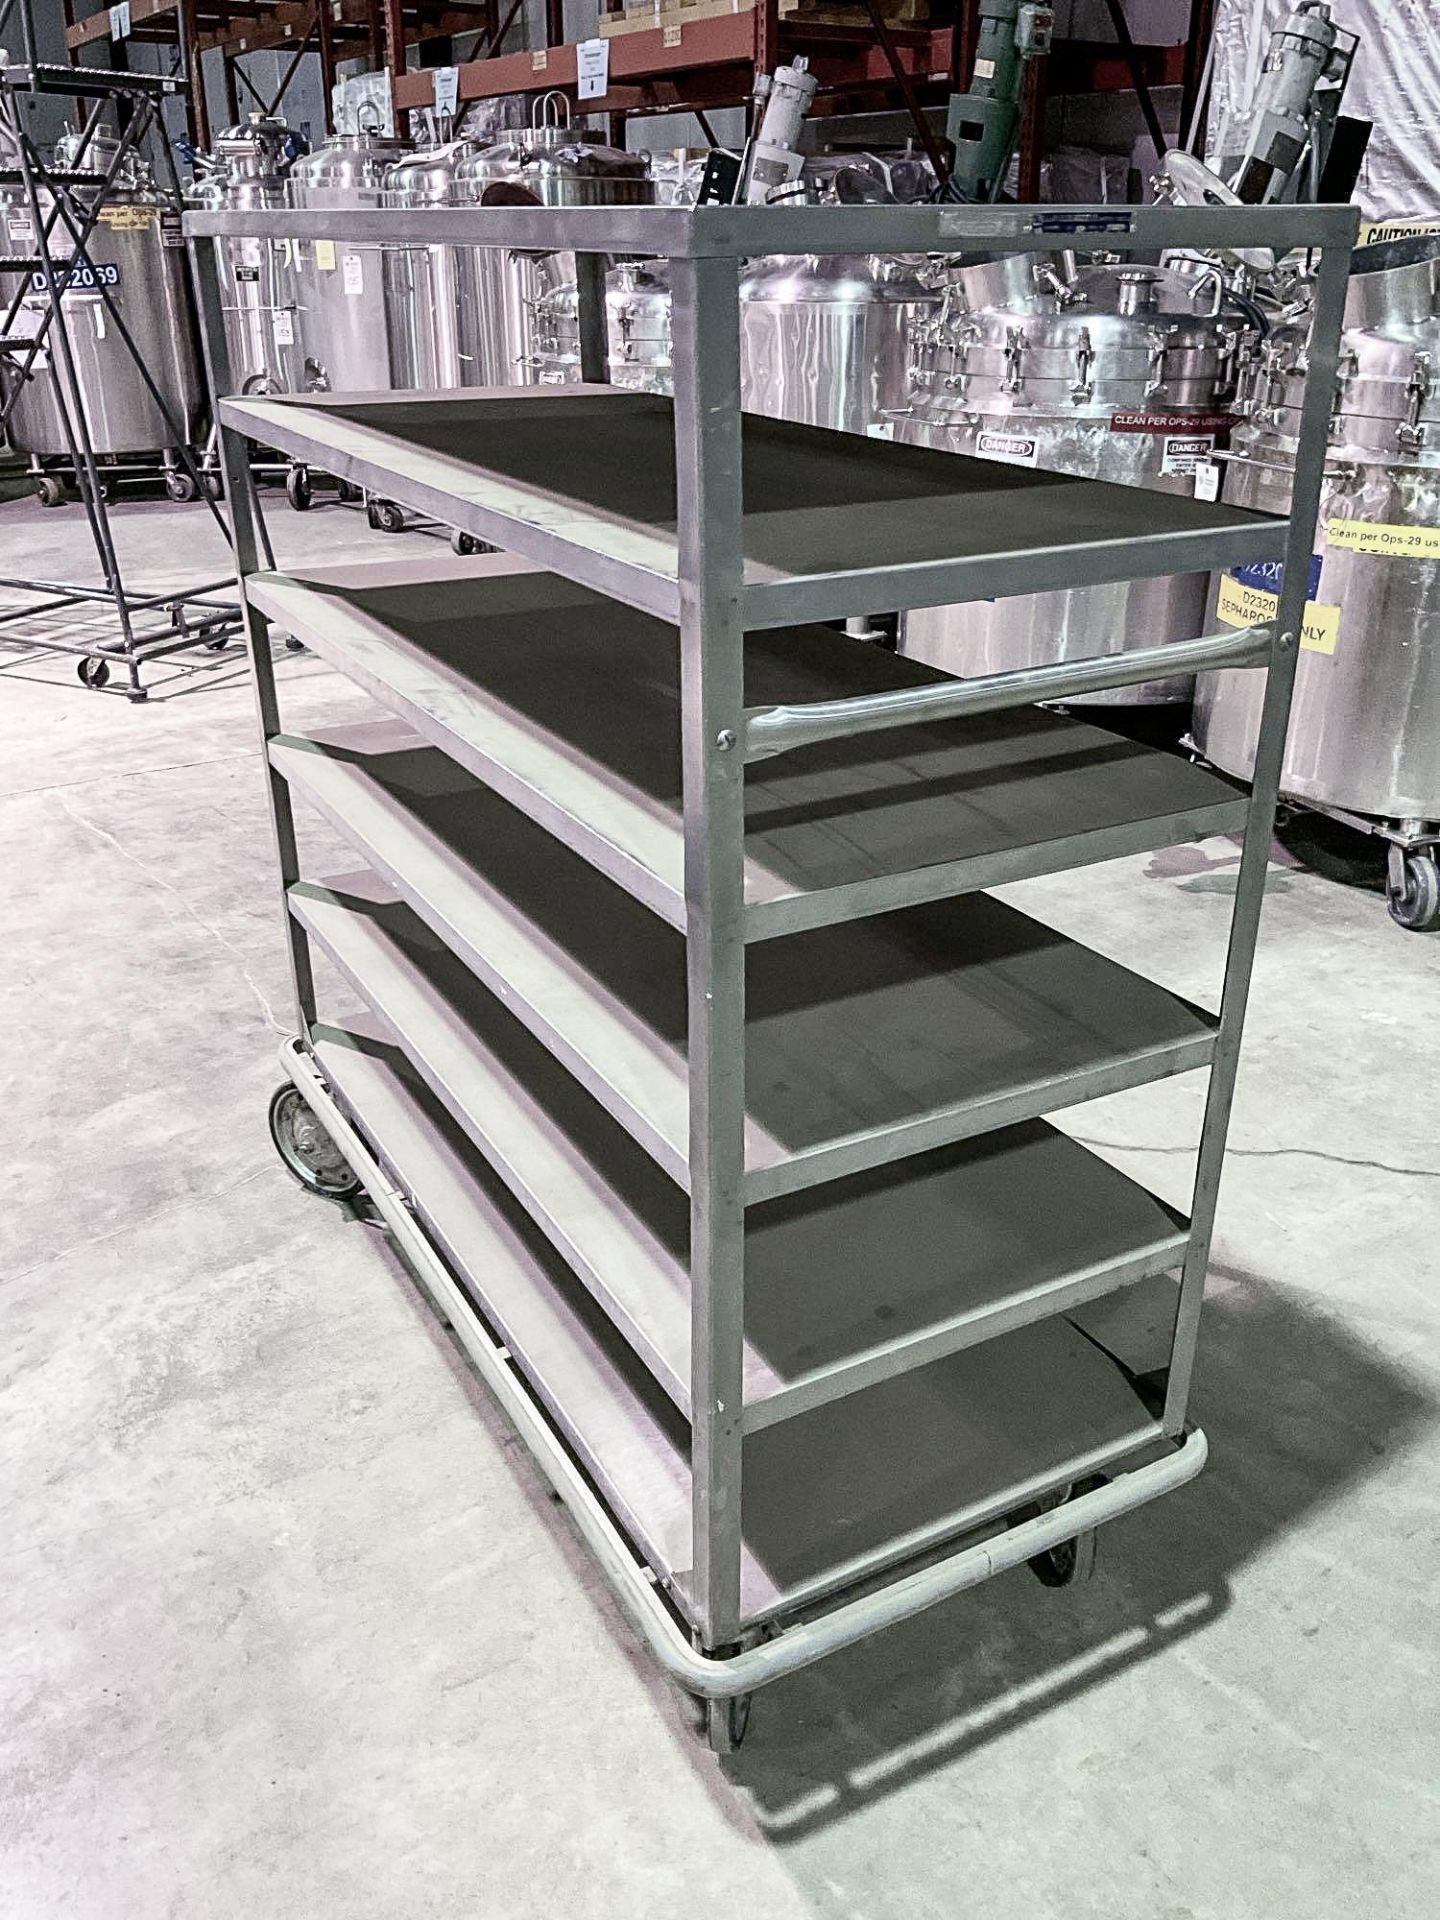 SIX SHELF STAINLESS STEEL ROLLER CART - Image 3 of 6